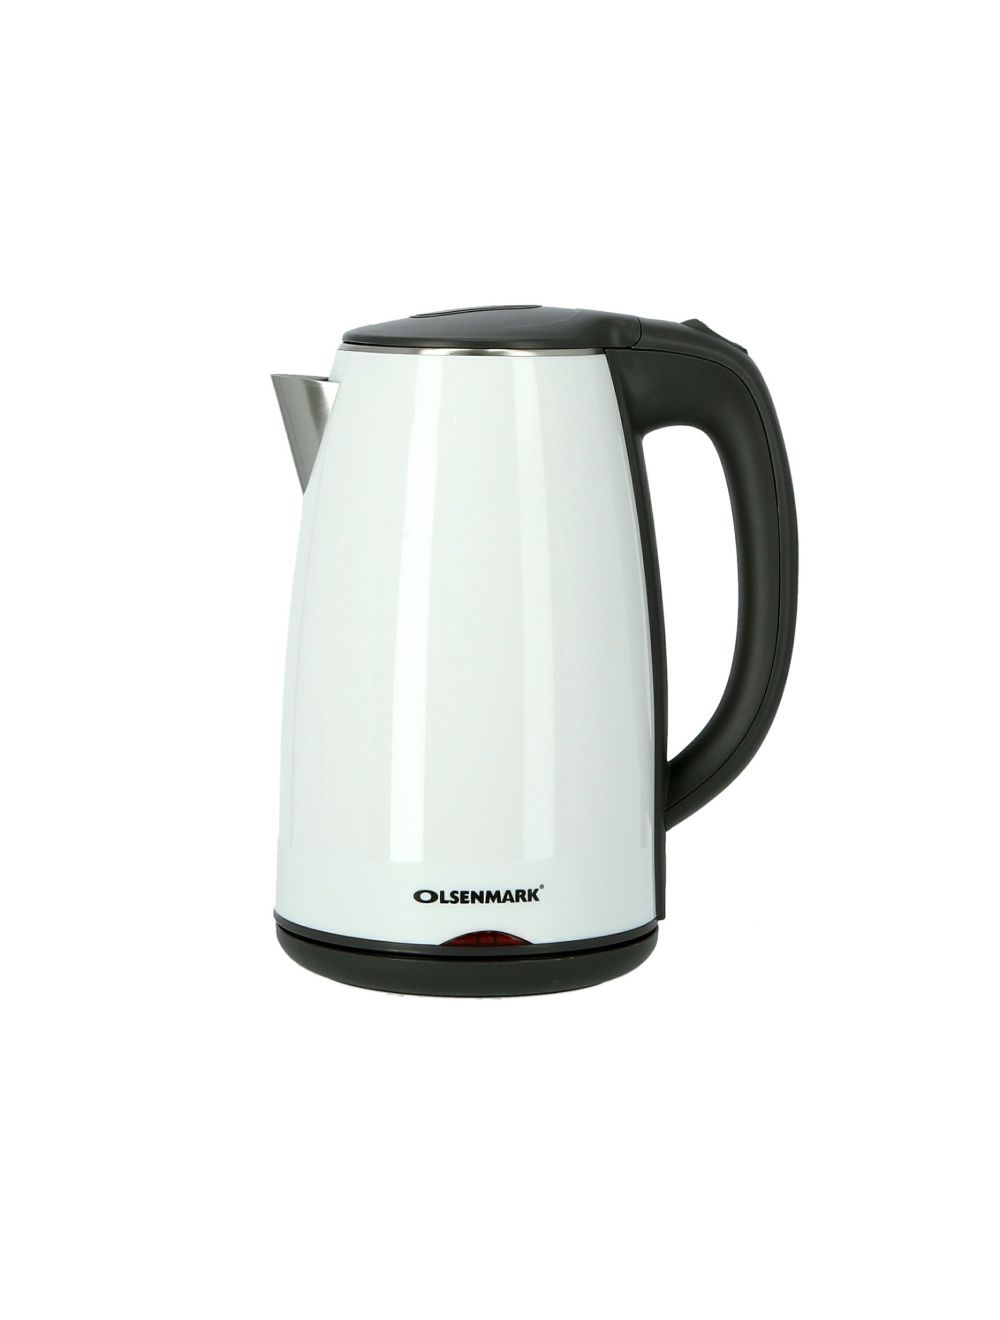 Olsenmark 1.7L Cordless Electric Kettle - Portable Kettle with Boil Dry Protection & Auto Shut Off Feature